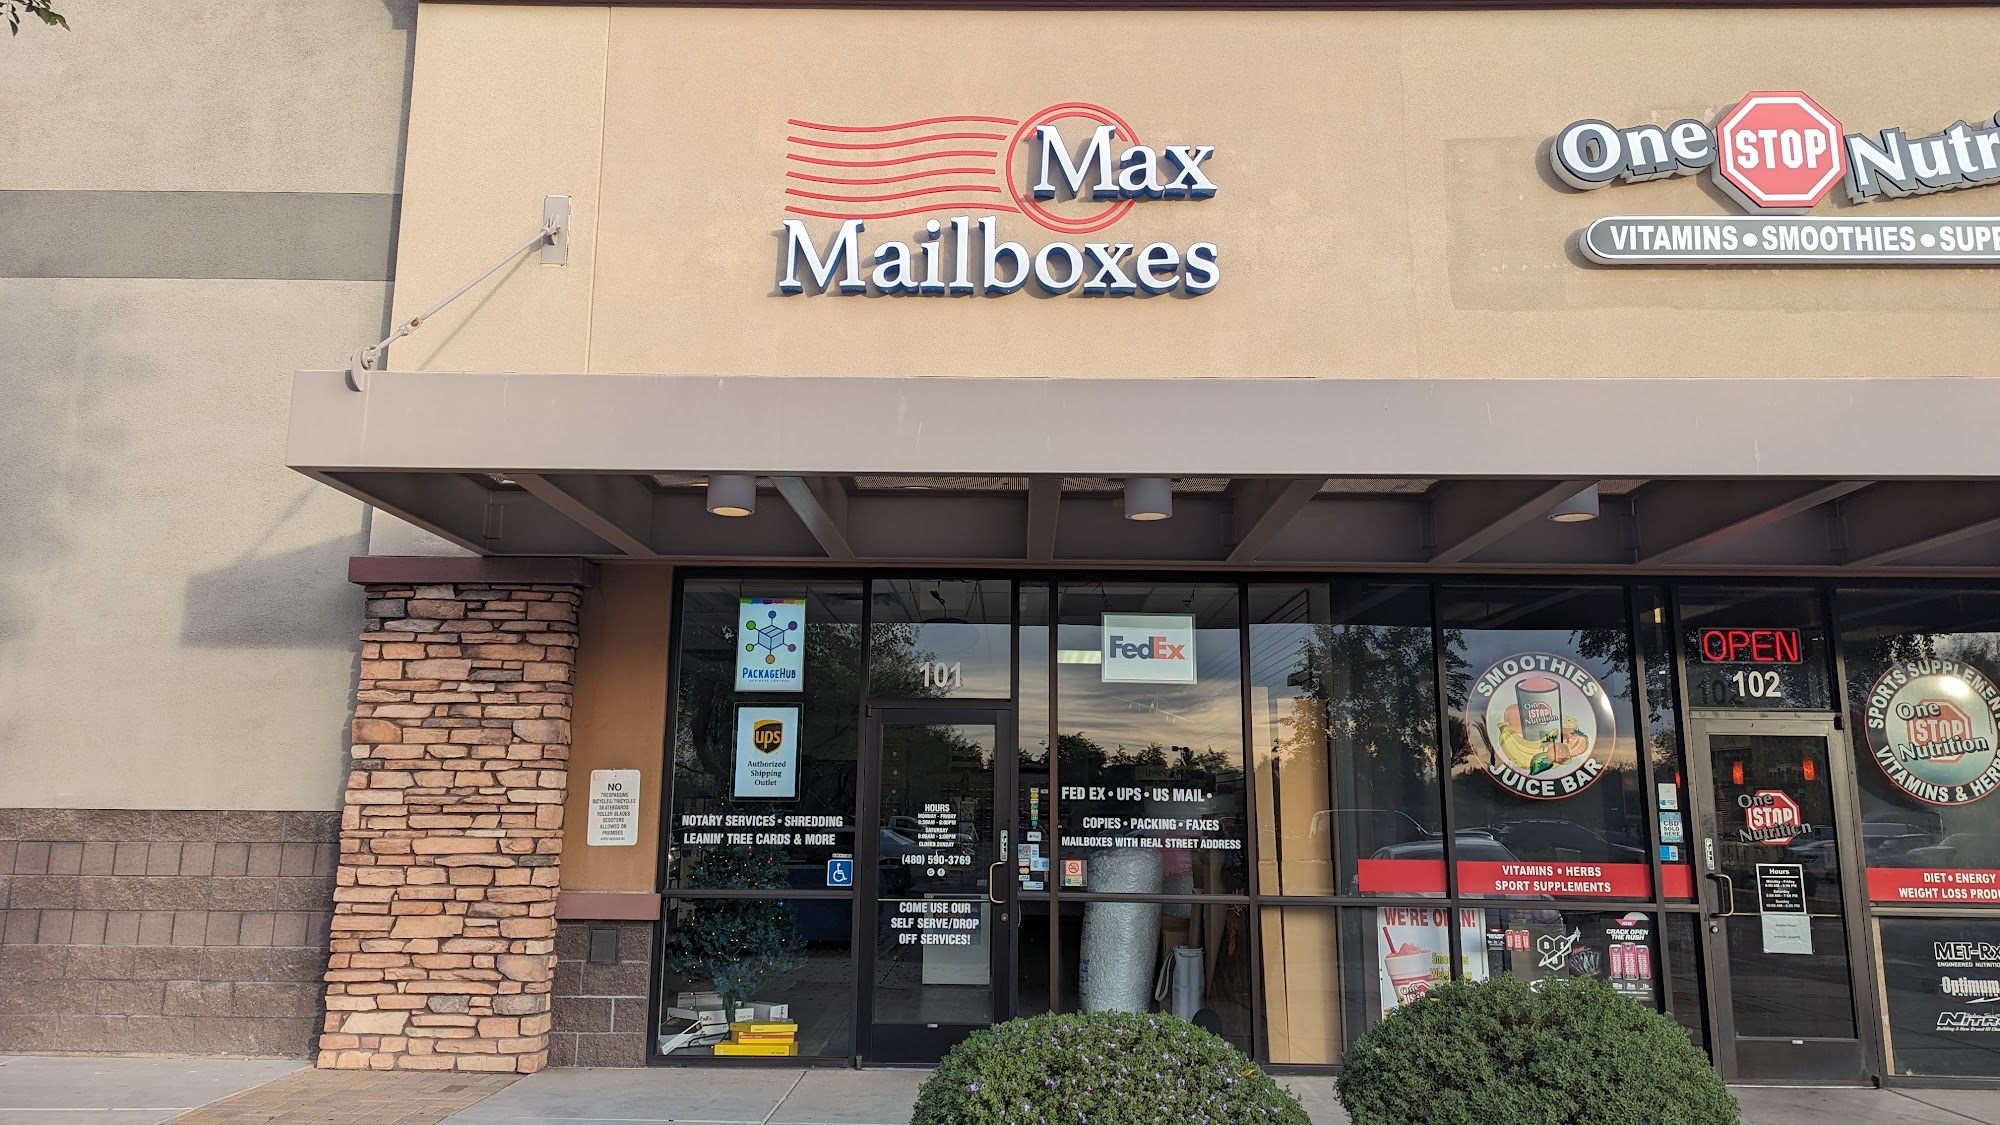 Max Mailboxes